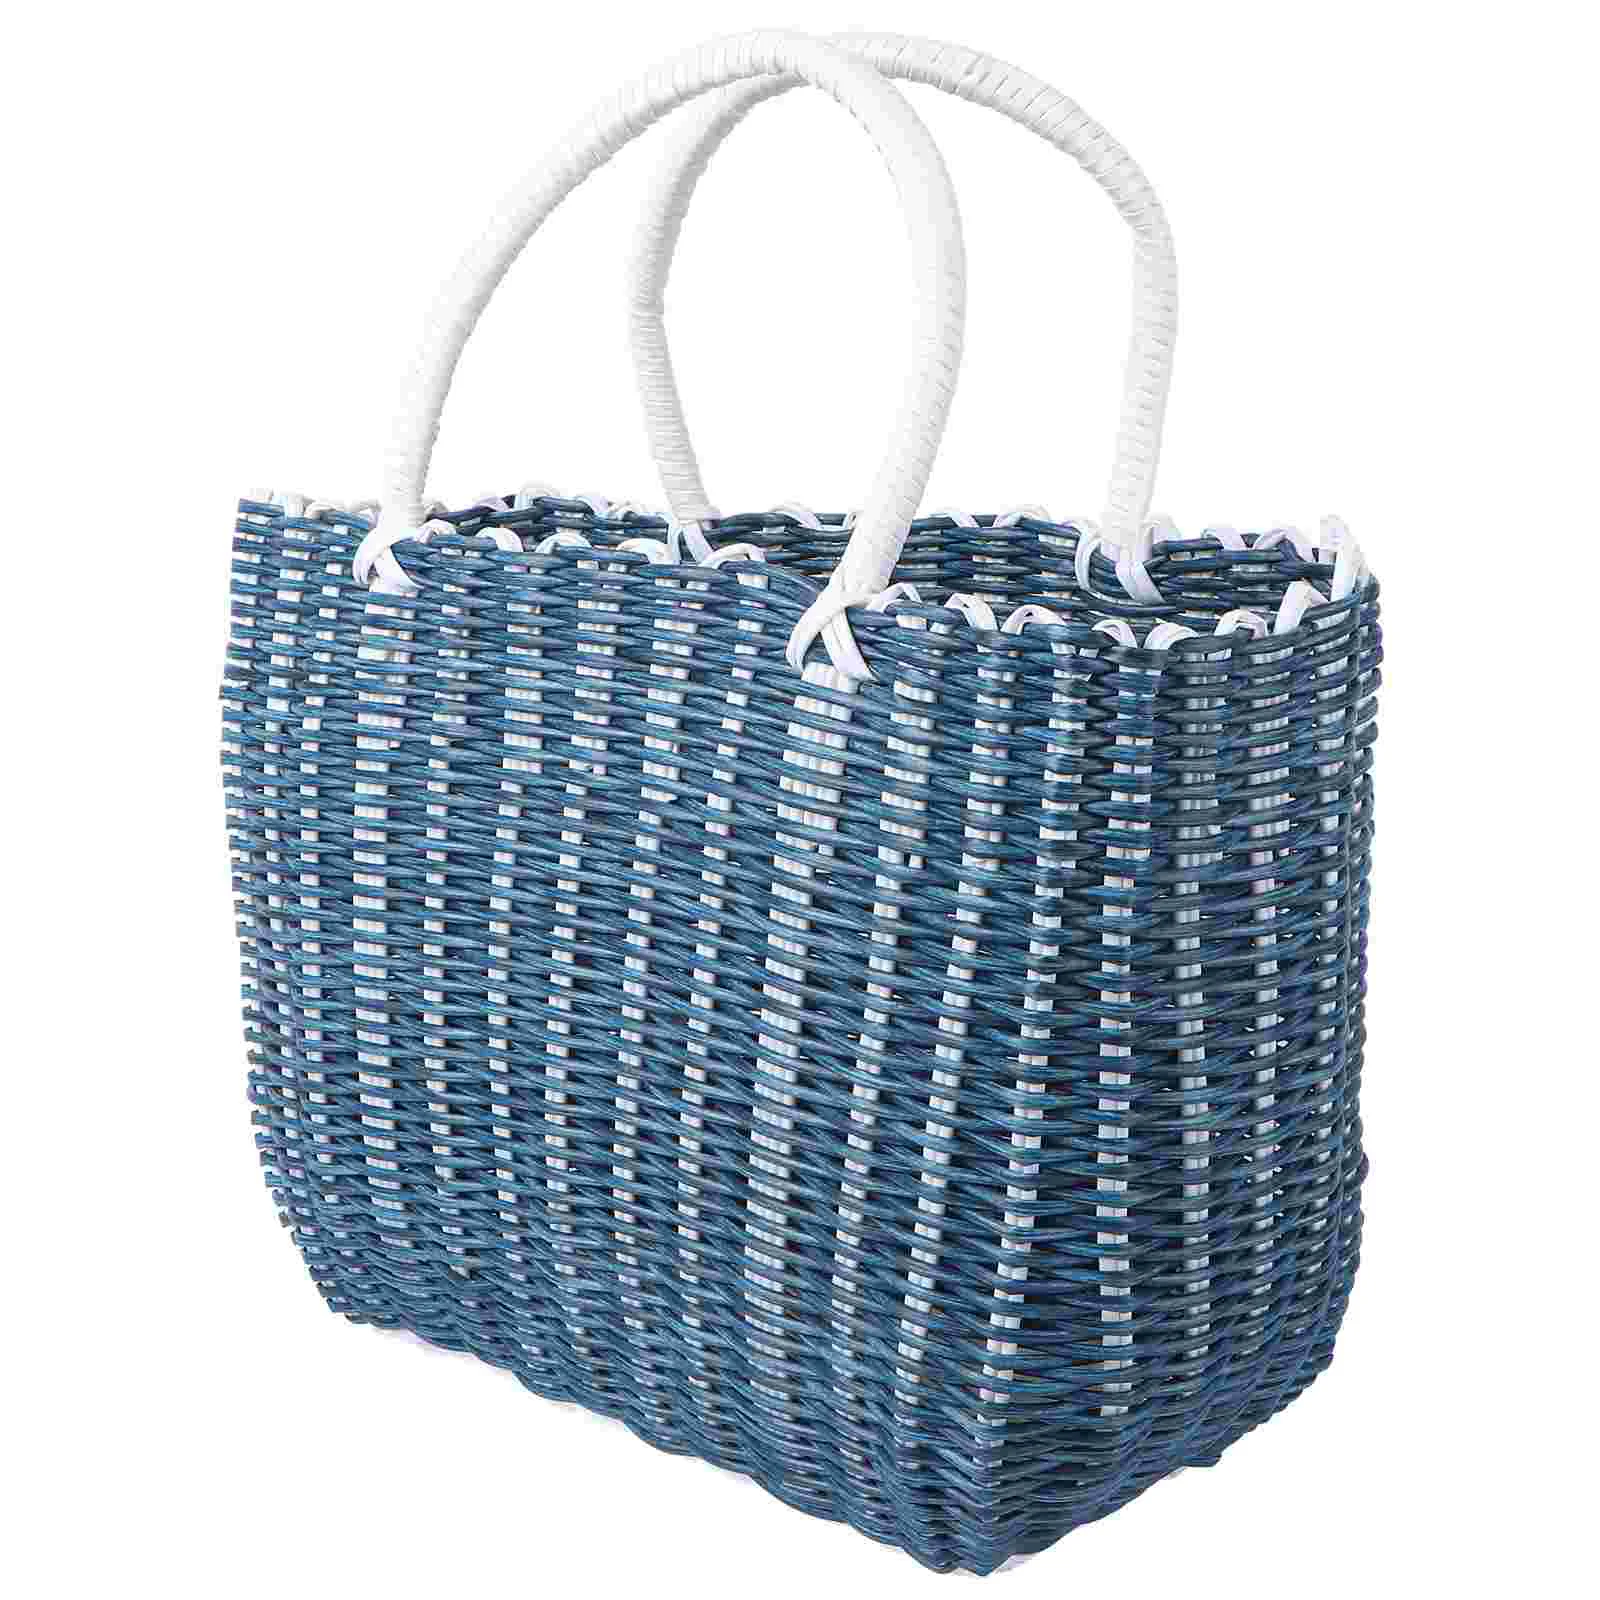 

Basket Bag Woven Shopping Toteplastic Market Handle Grocery Storage Beach Picnic Bags Baskets Handles Straw Wicker Rattan Shower